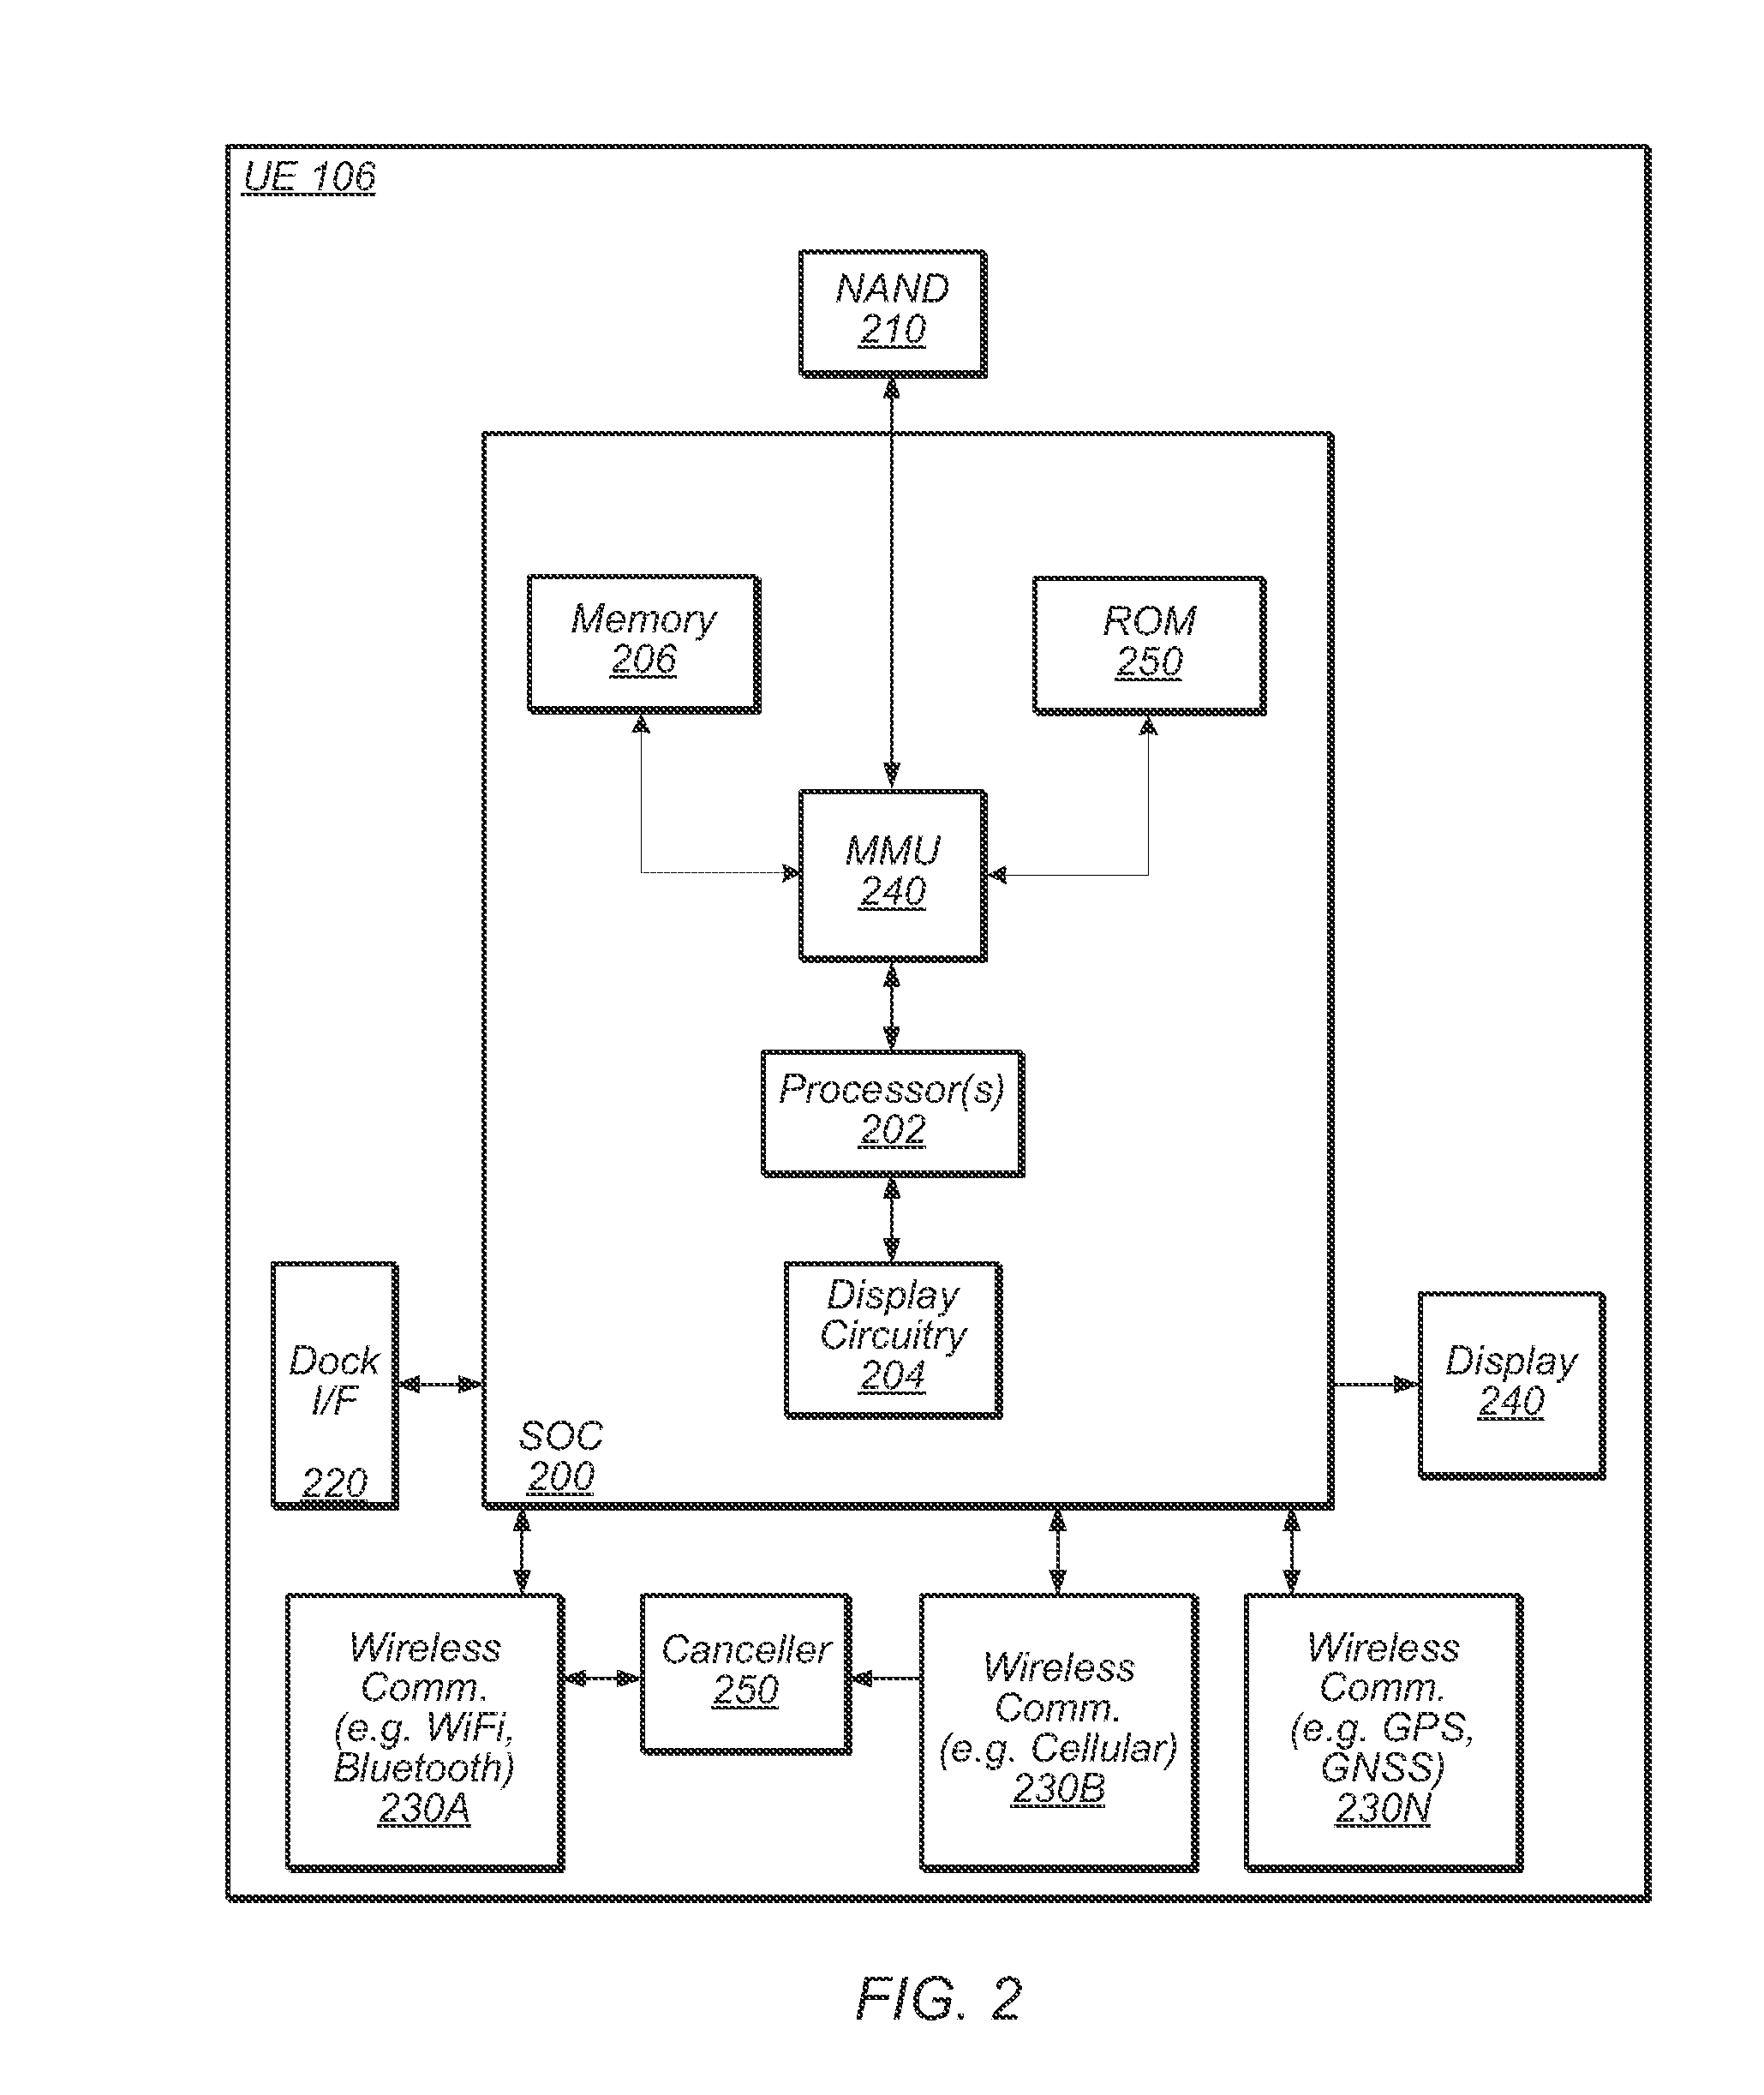 System and Method of Adaptive Out-of-Band Interference Cancellation for Coexistence